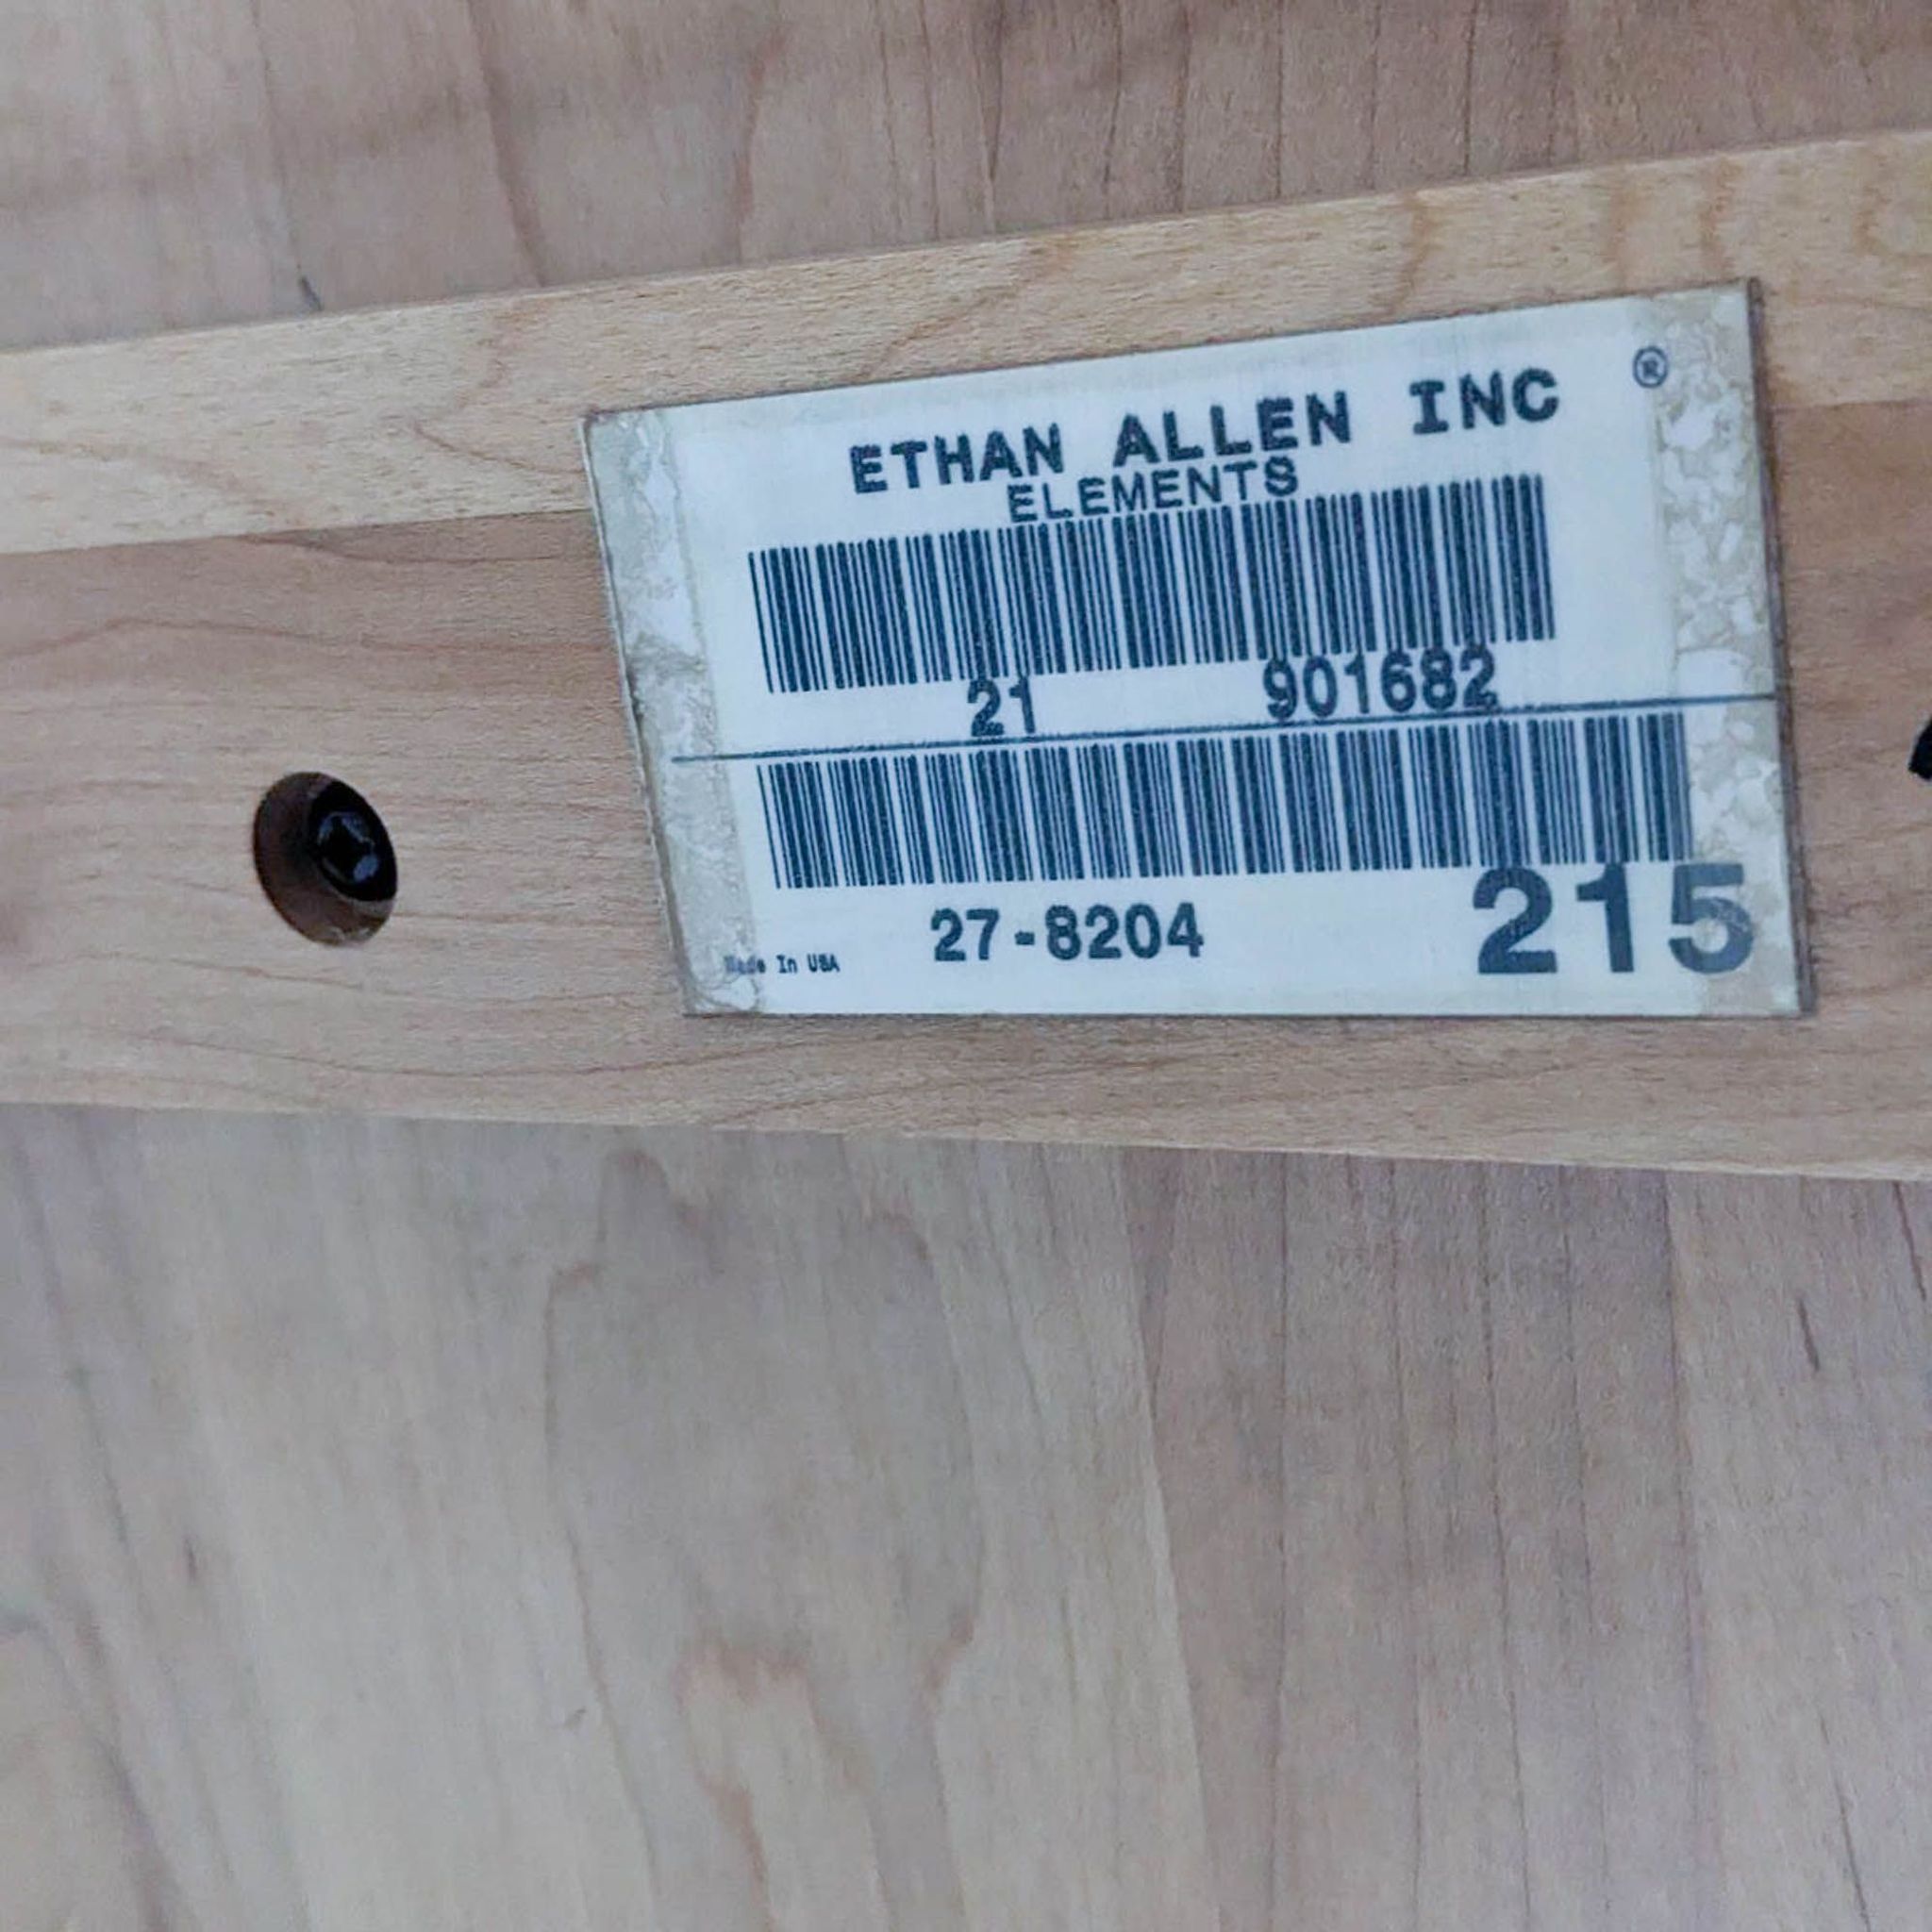 Label on a maple end table showing "Ethan Allen" brand details, with barcode and model number.